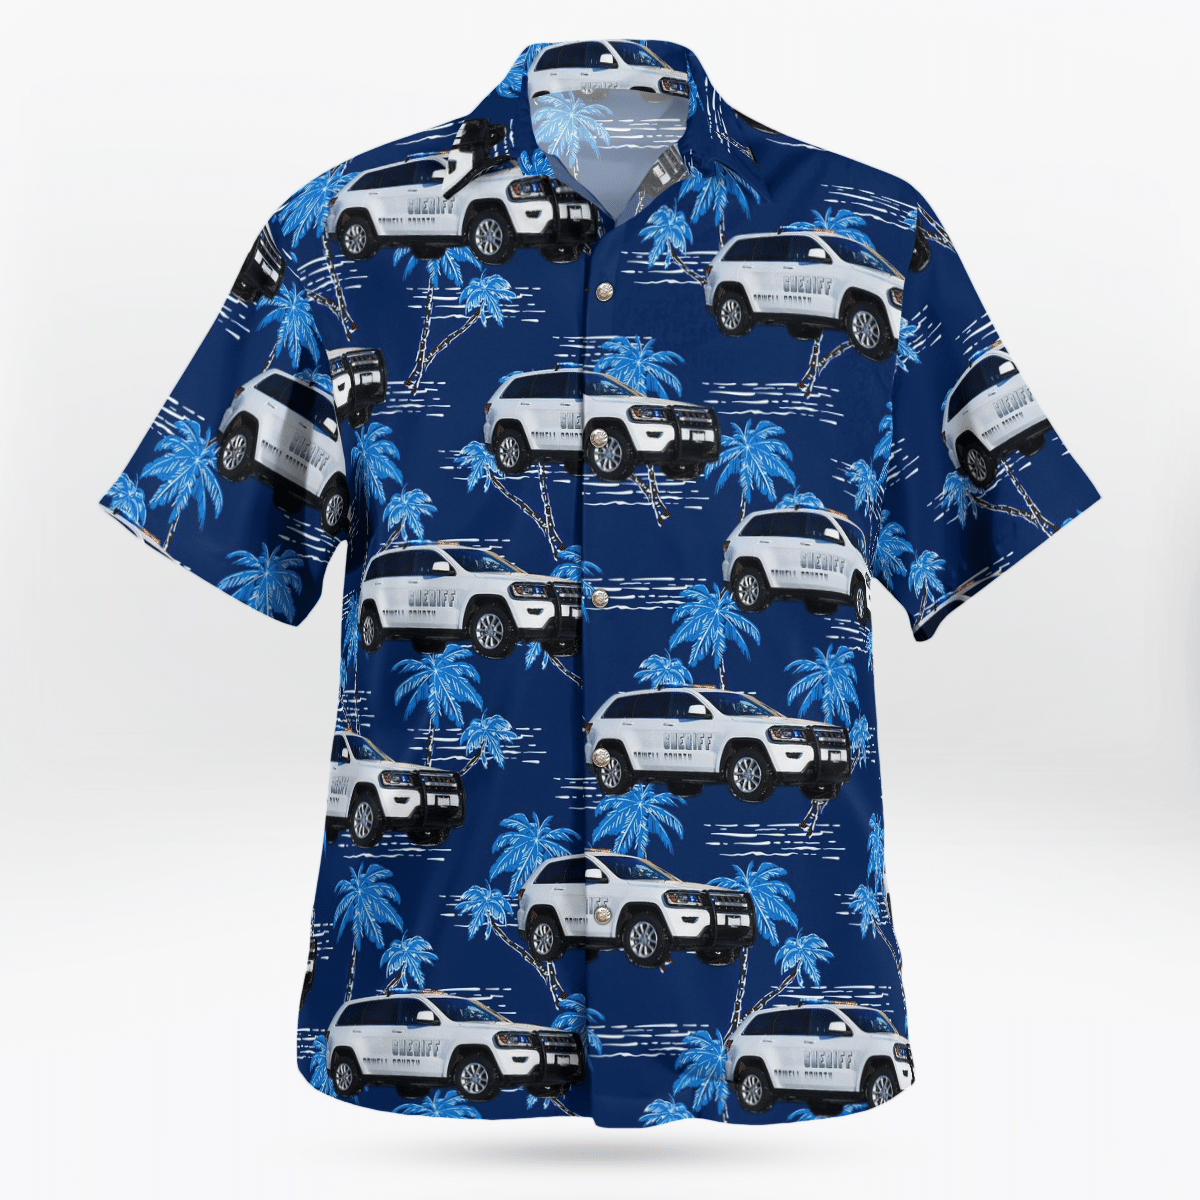 Hawaiian shirts never go out of style 129